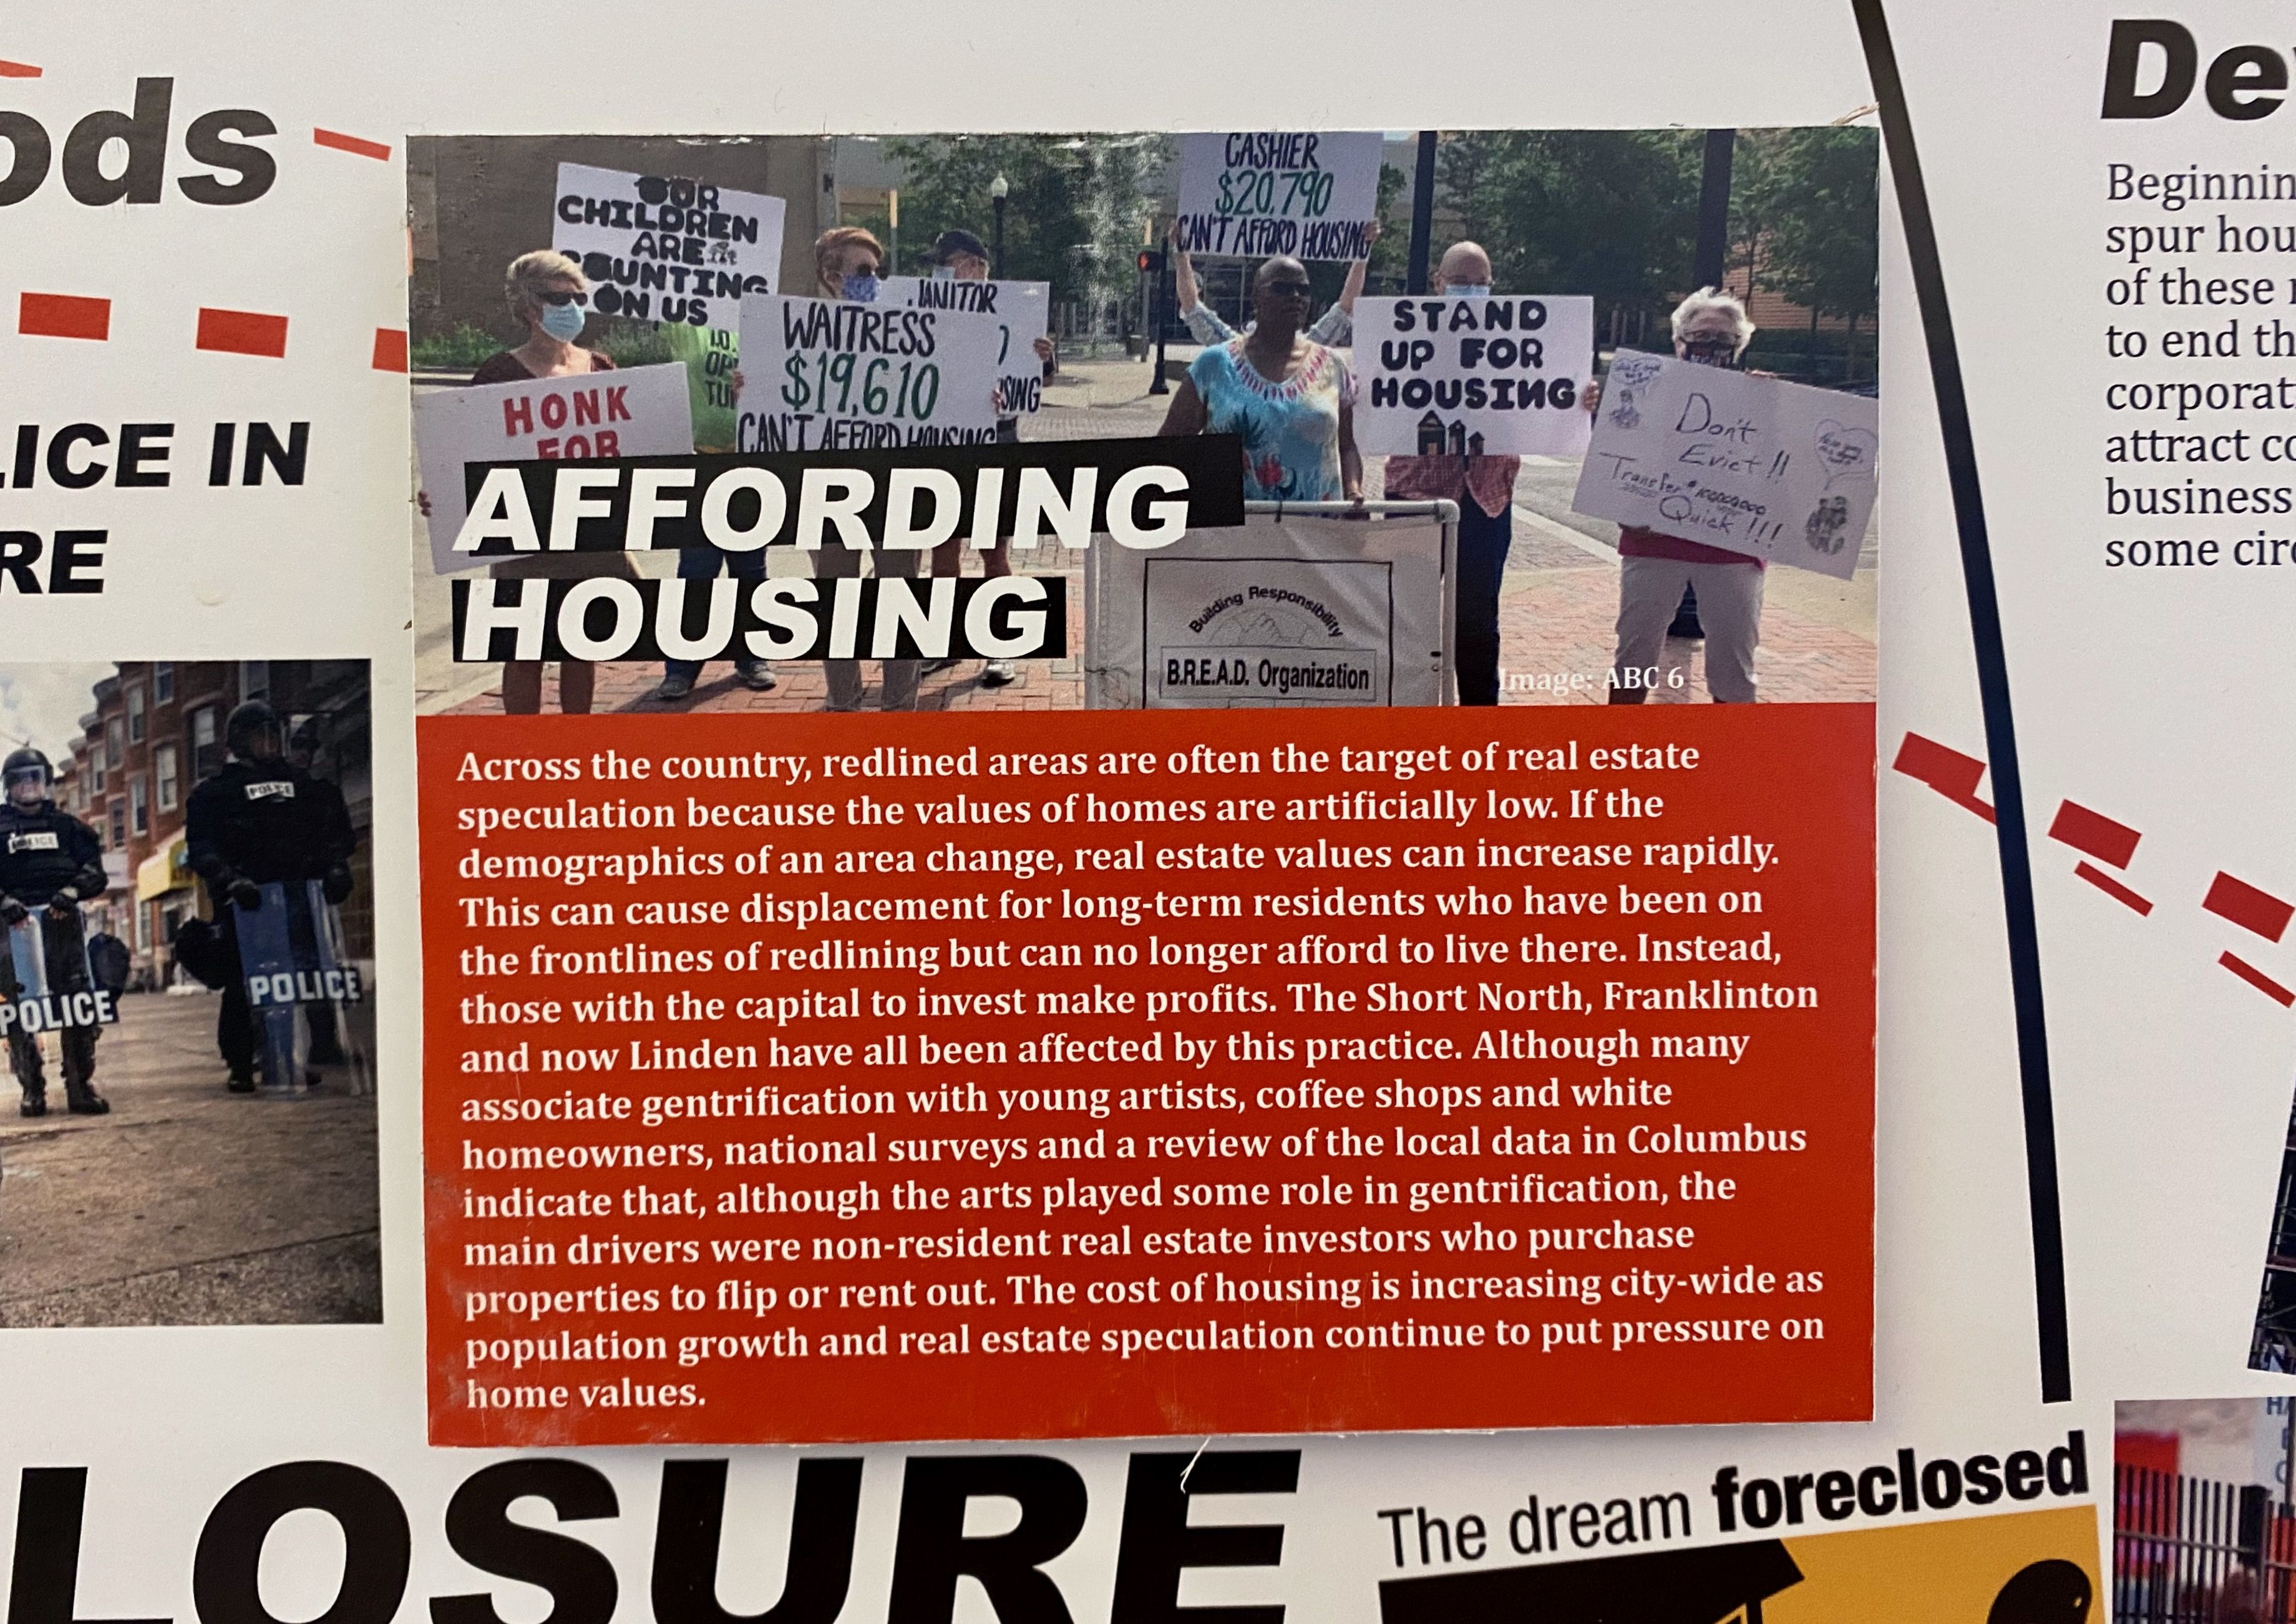 A story card on the exhibit explains redlining's association with gentrification today